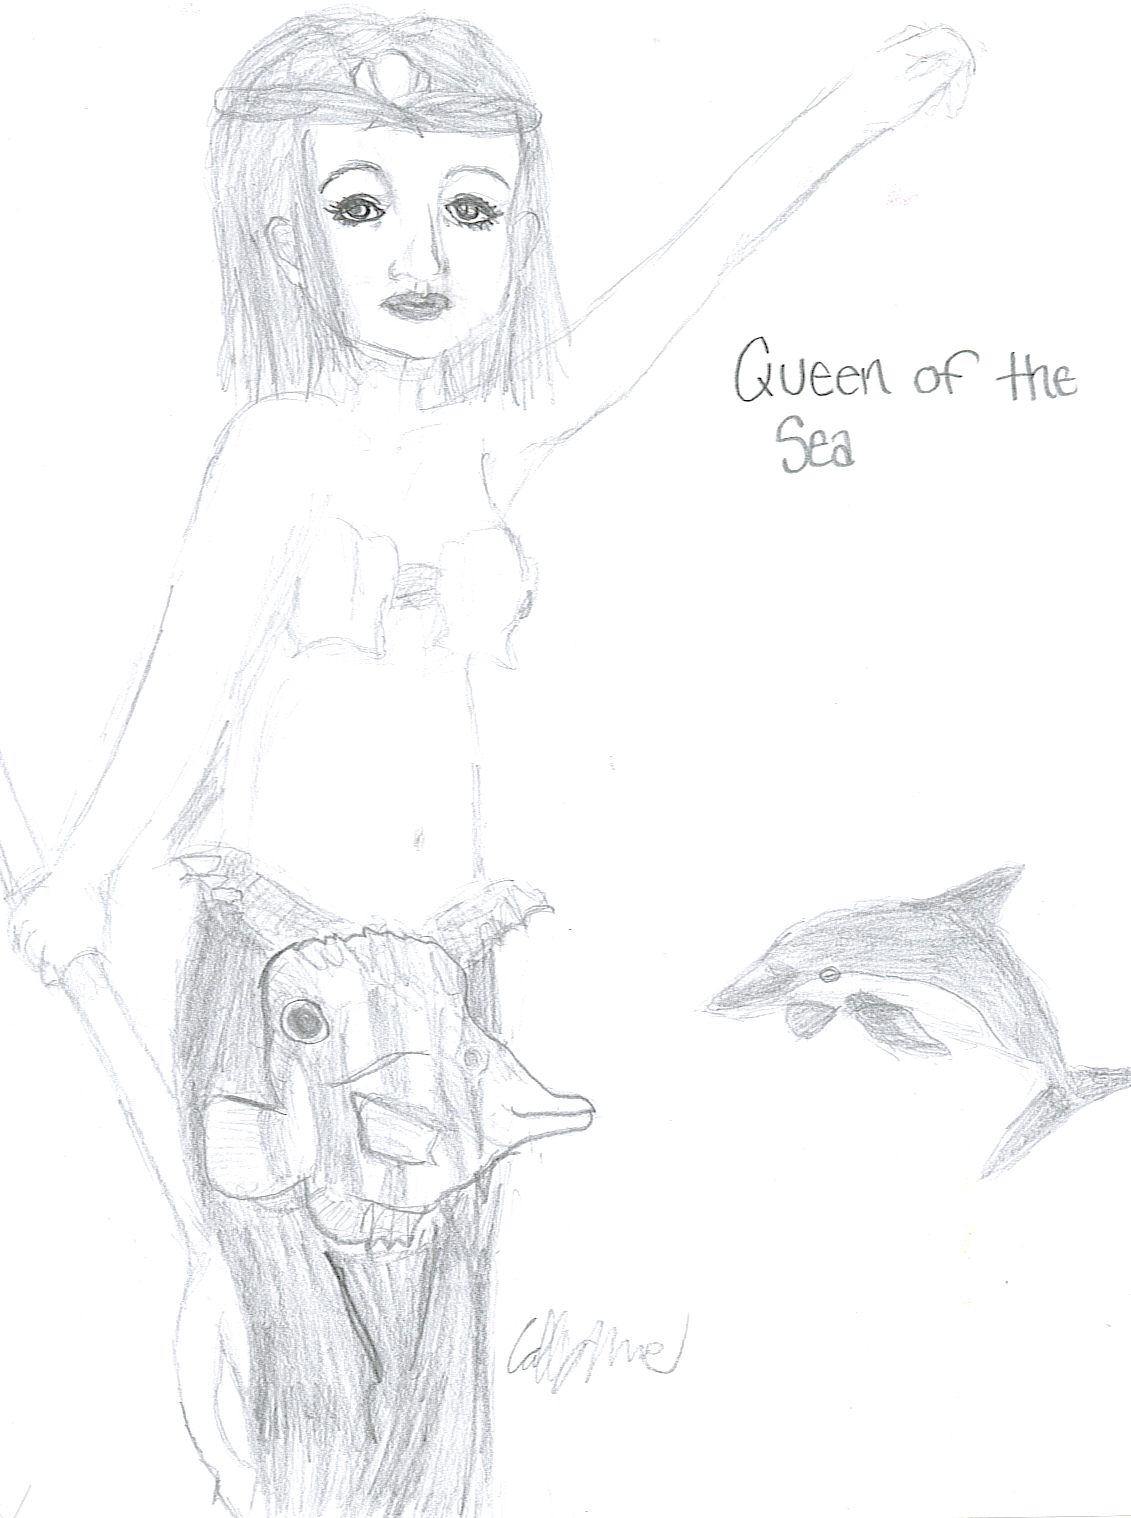 Queen of the sea by InnocentEvil